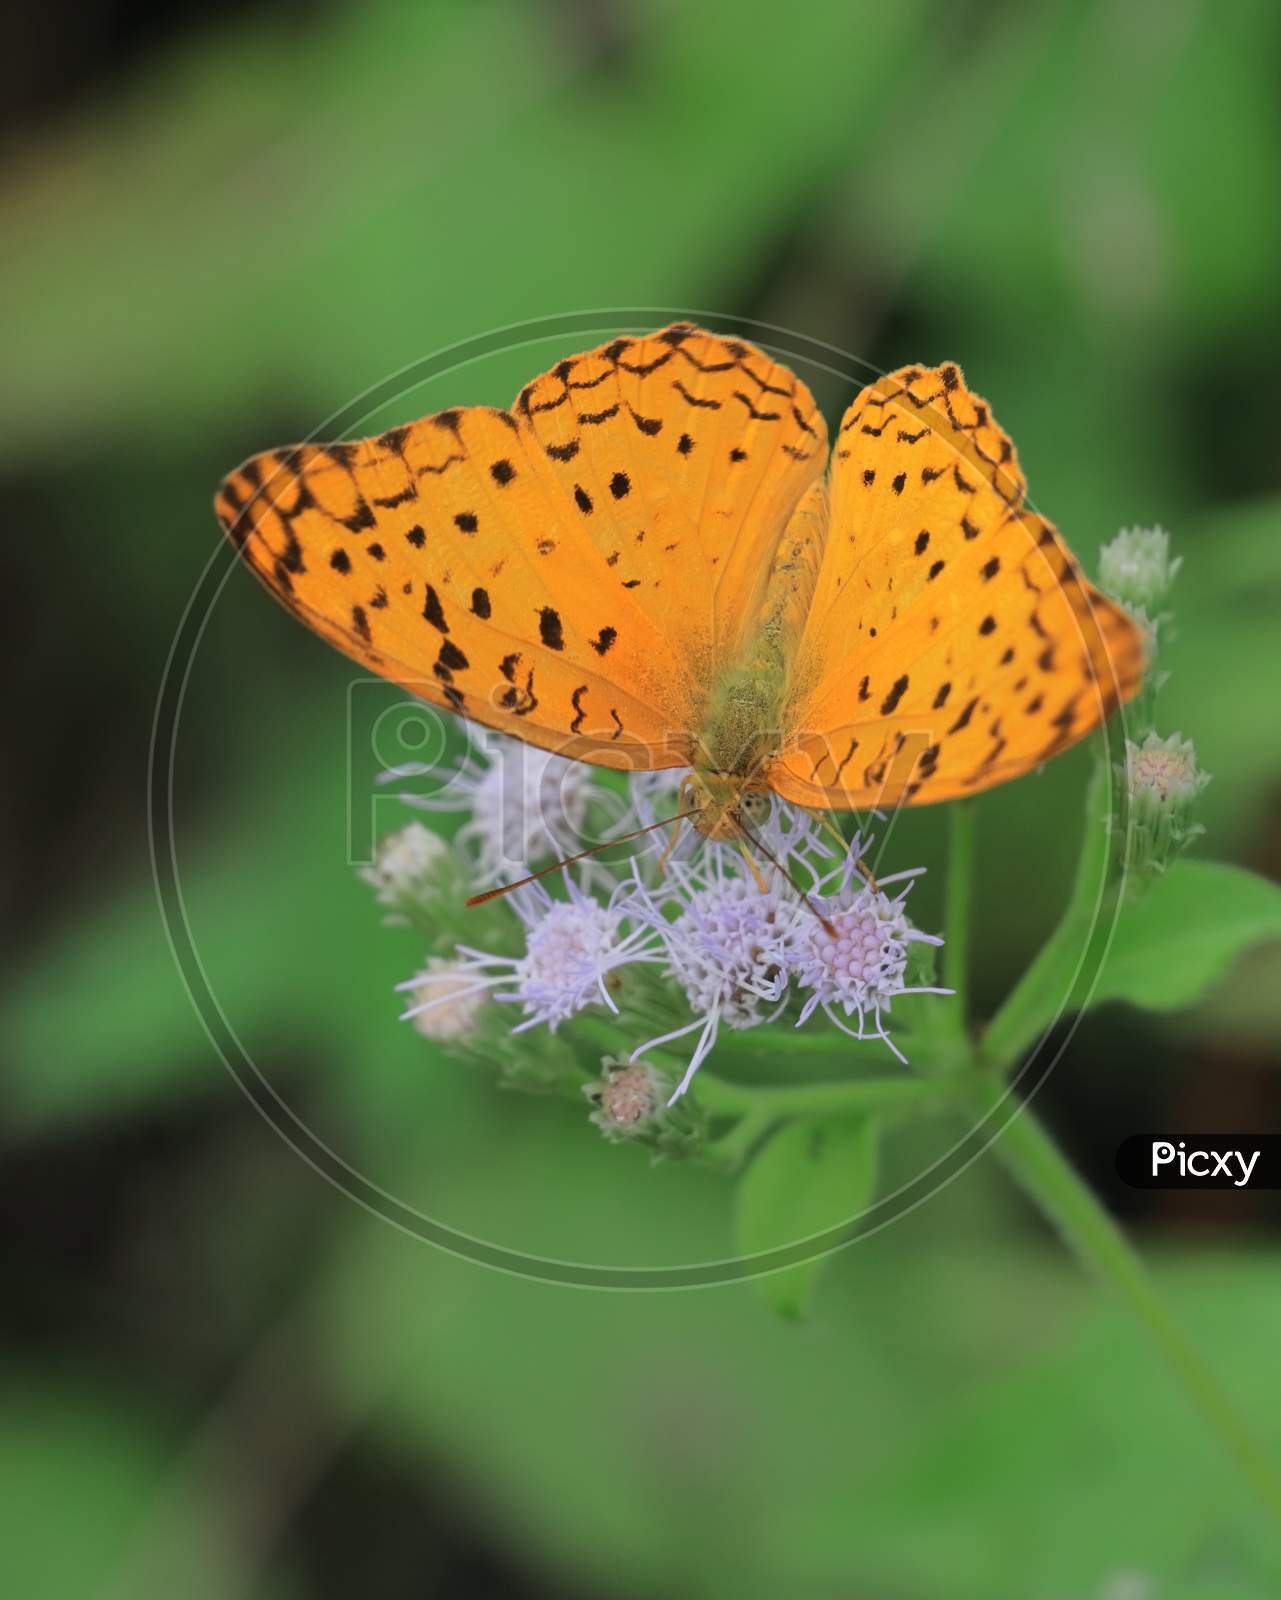 phalanta phalantha, common leopard or spotted rustic butterfly in tropical forest, springtime